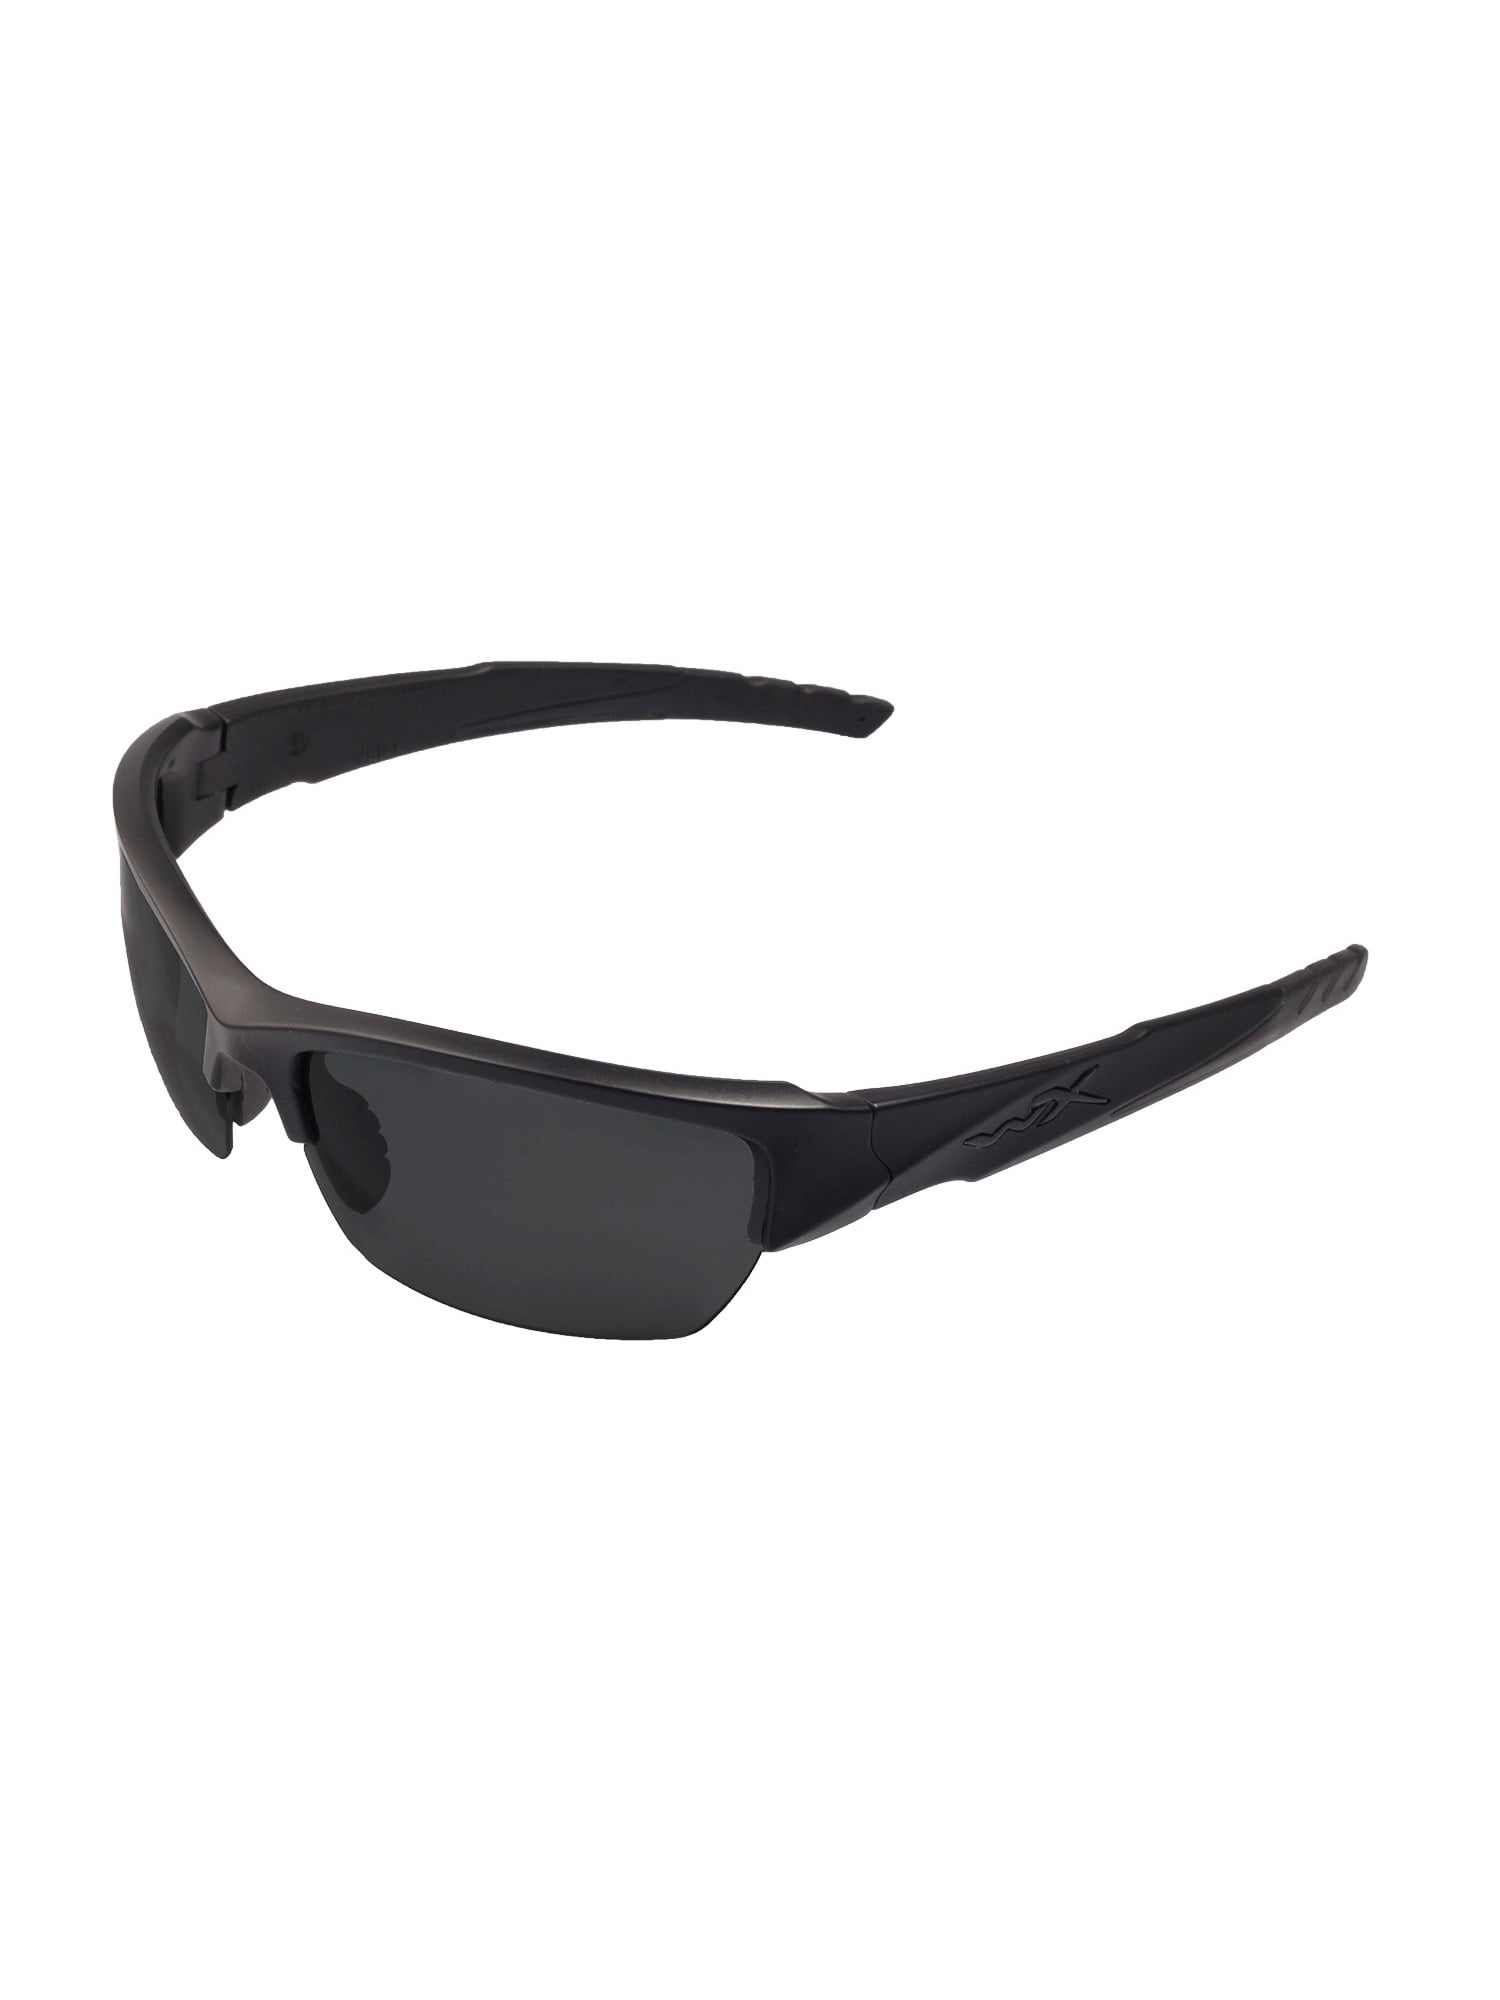 Walleva Replacement Lenses for Wiley X Valor Sunglasses Multiple Options Available 